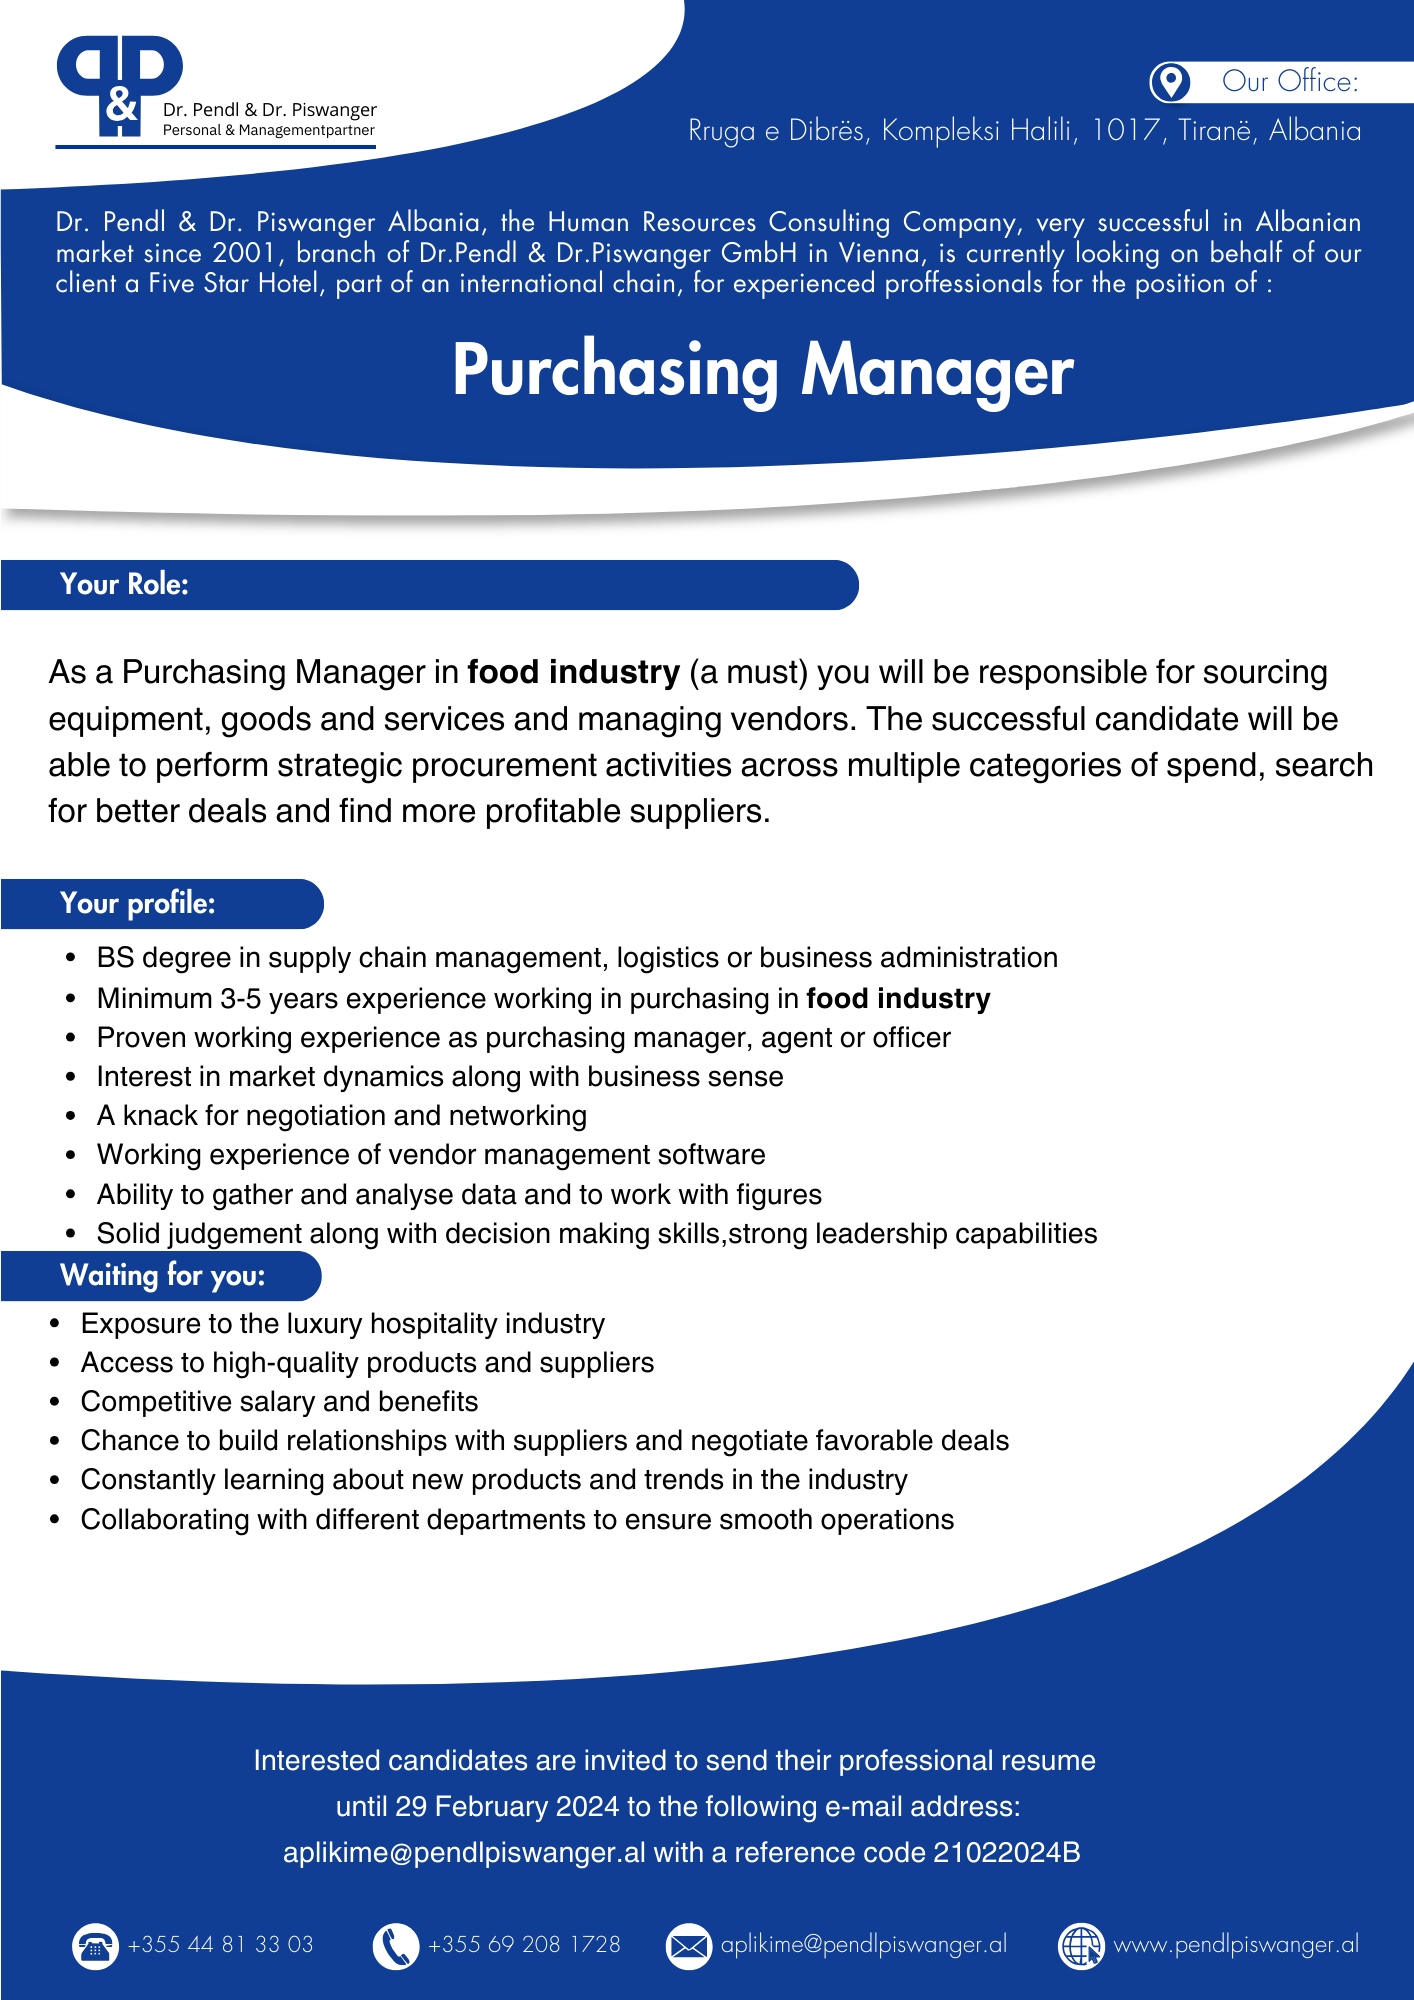 We are hiring Purchasing Manager !